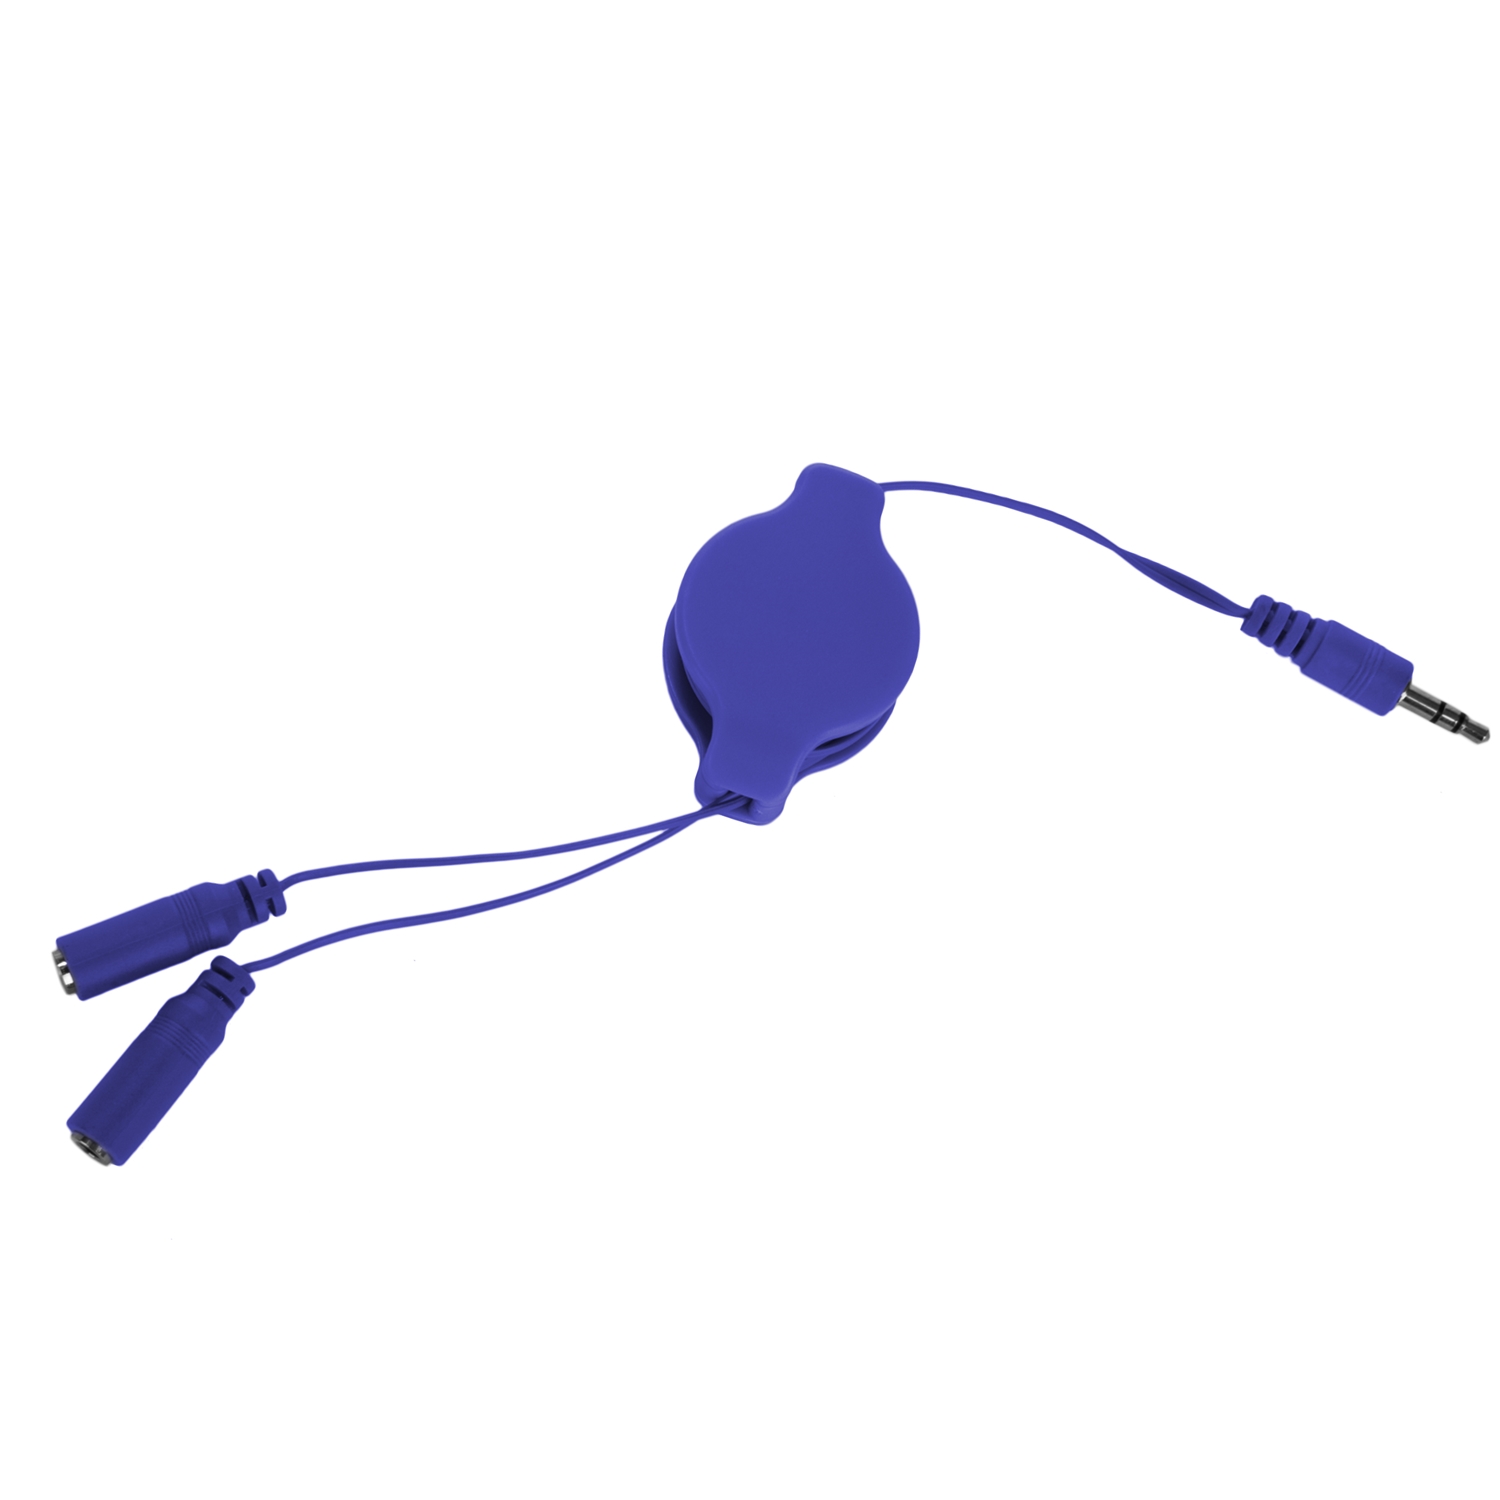 sumaclife Retractable 3.2' Headphone Splitter (3.5mm Male to 2 3.5 mm Female) Cable Compatible with All Laptop Devices (Navy Blue)